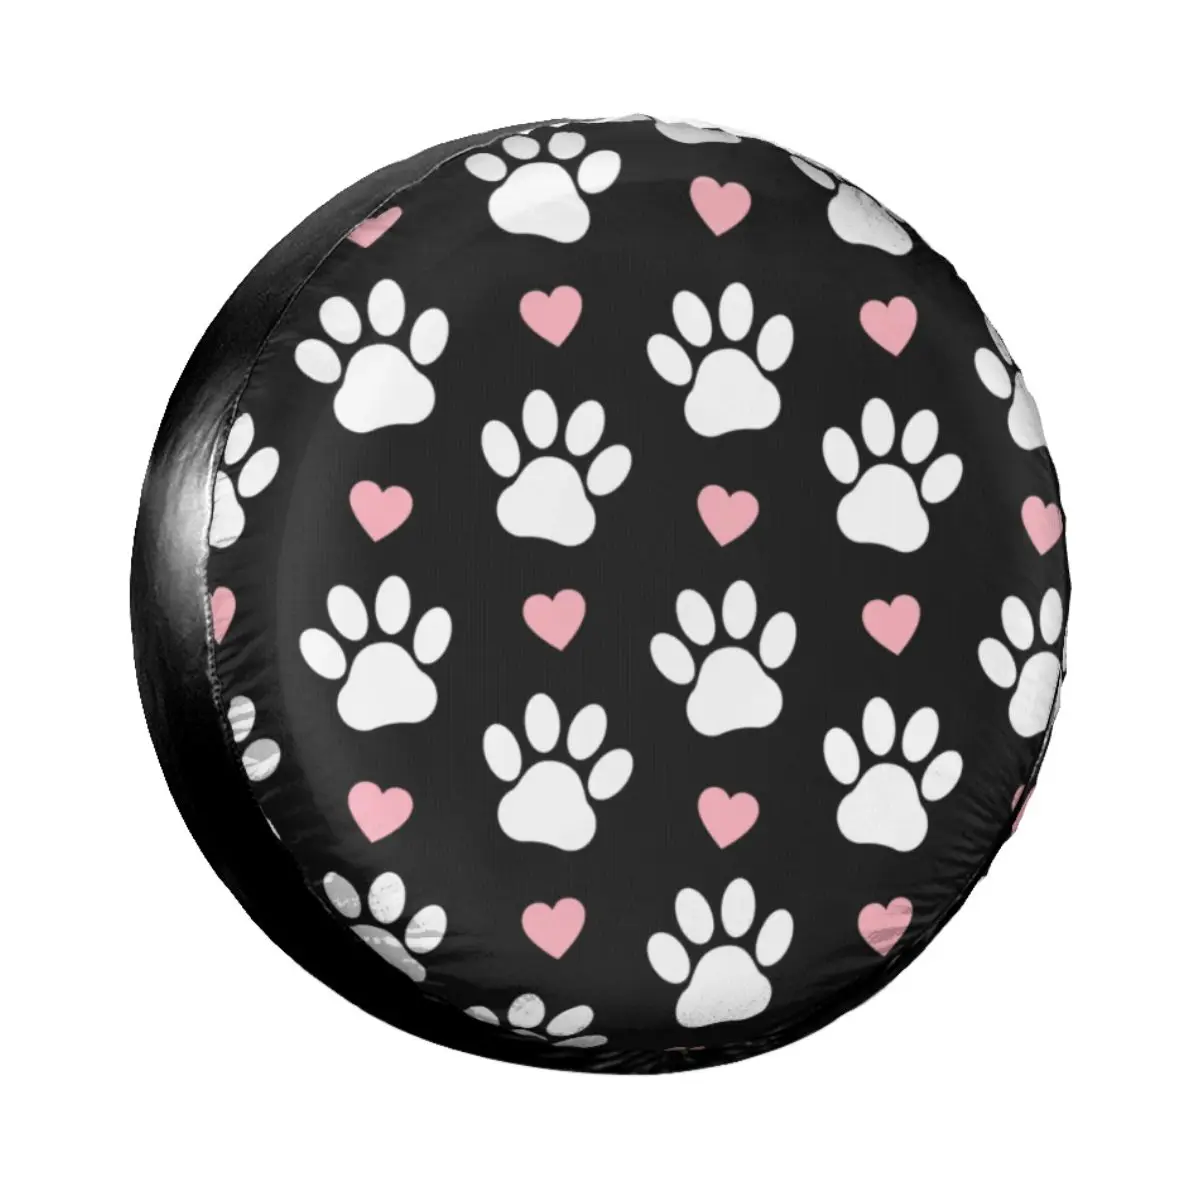 

Of Paws White Dog Paw Paw Spare Tire Cover for Mitsubishi Pajero Pretty Pink Hearts Car Wheel Protectors 14" 15" 16" 17" Inch